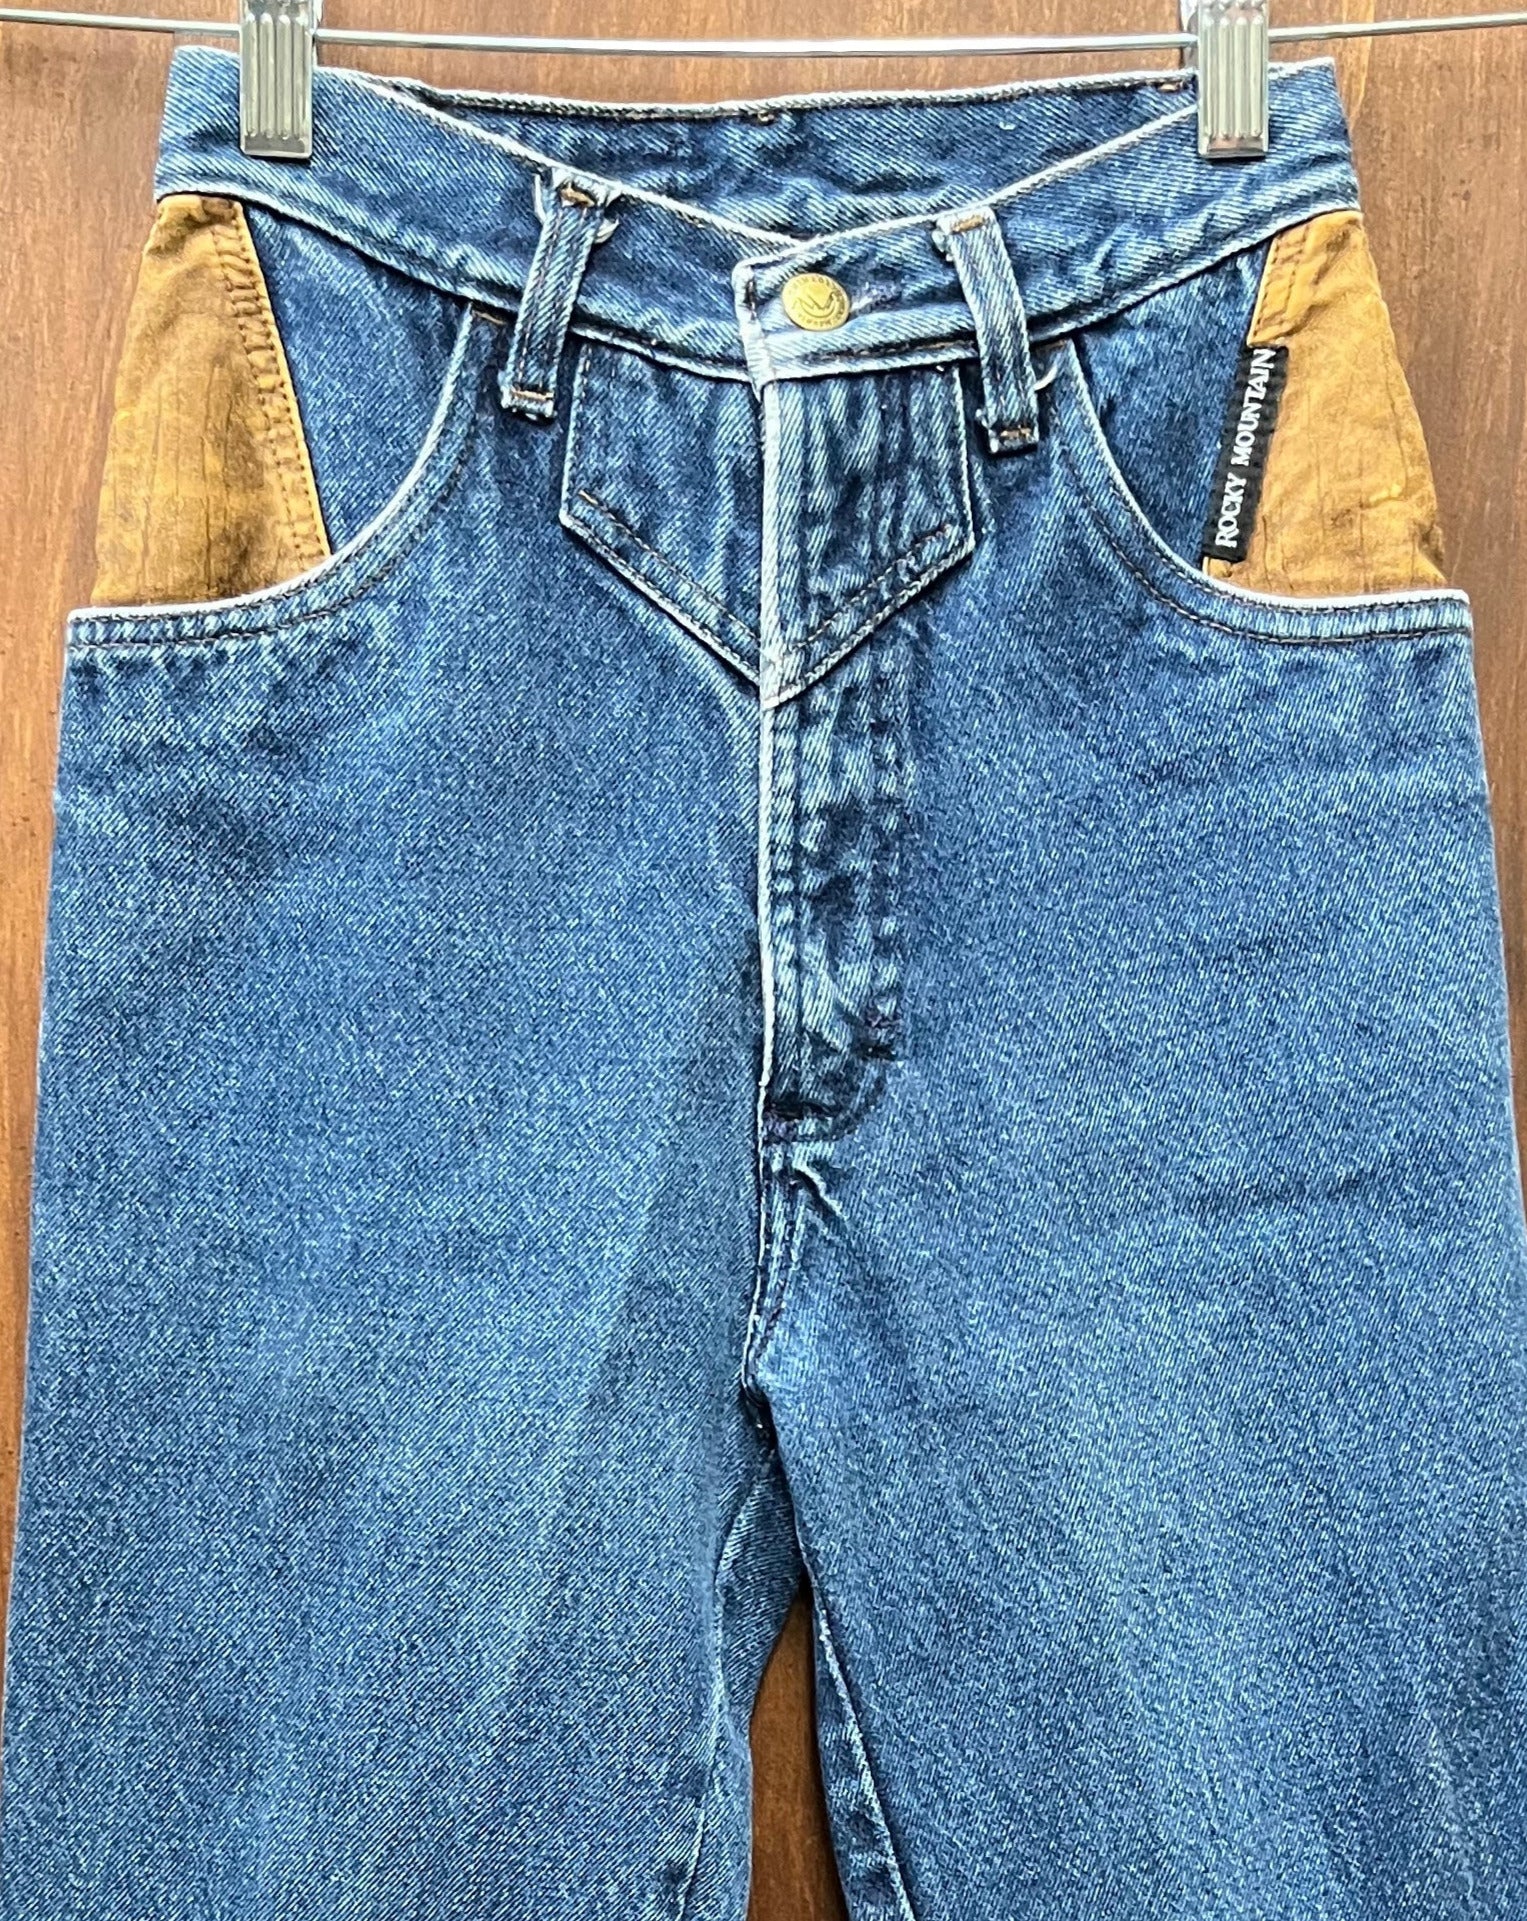 1990s JEANS- Rocky Mountain leather accent